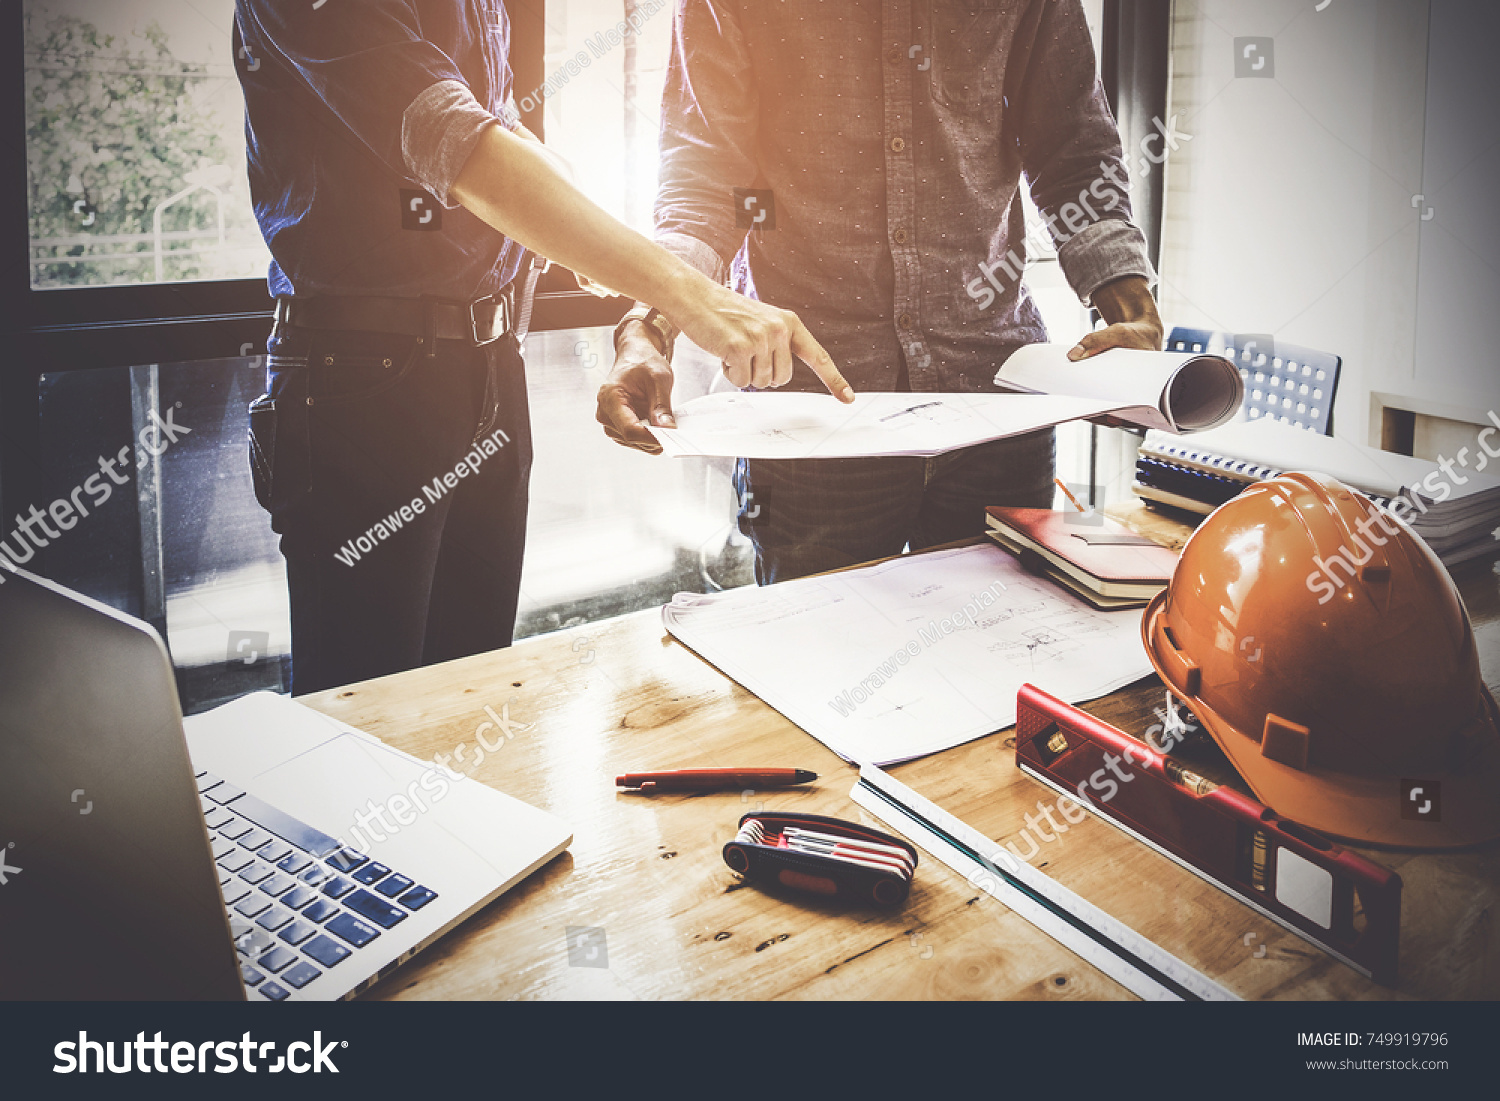 Two Architect man working with compasses and blueprints for architectural plan,engineer sketching a construction project concept. #749919796